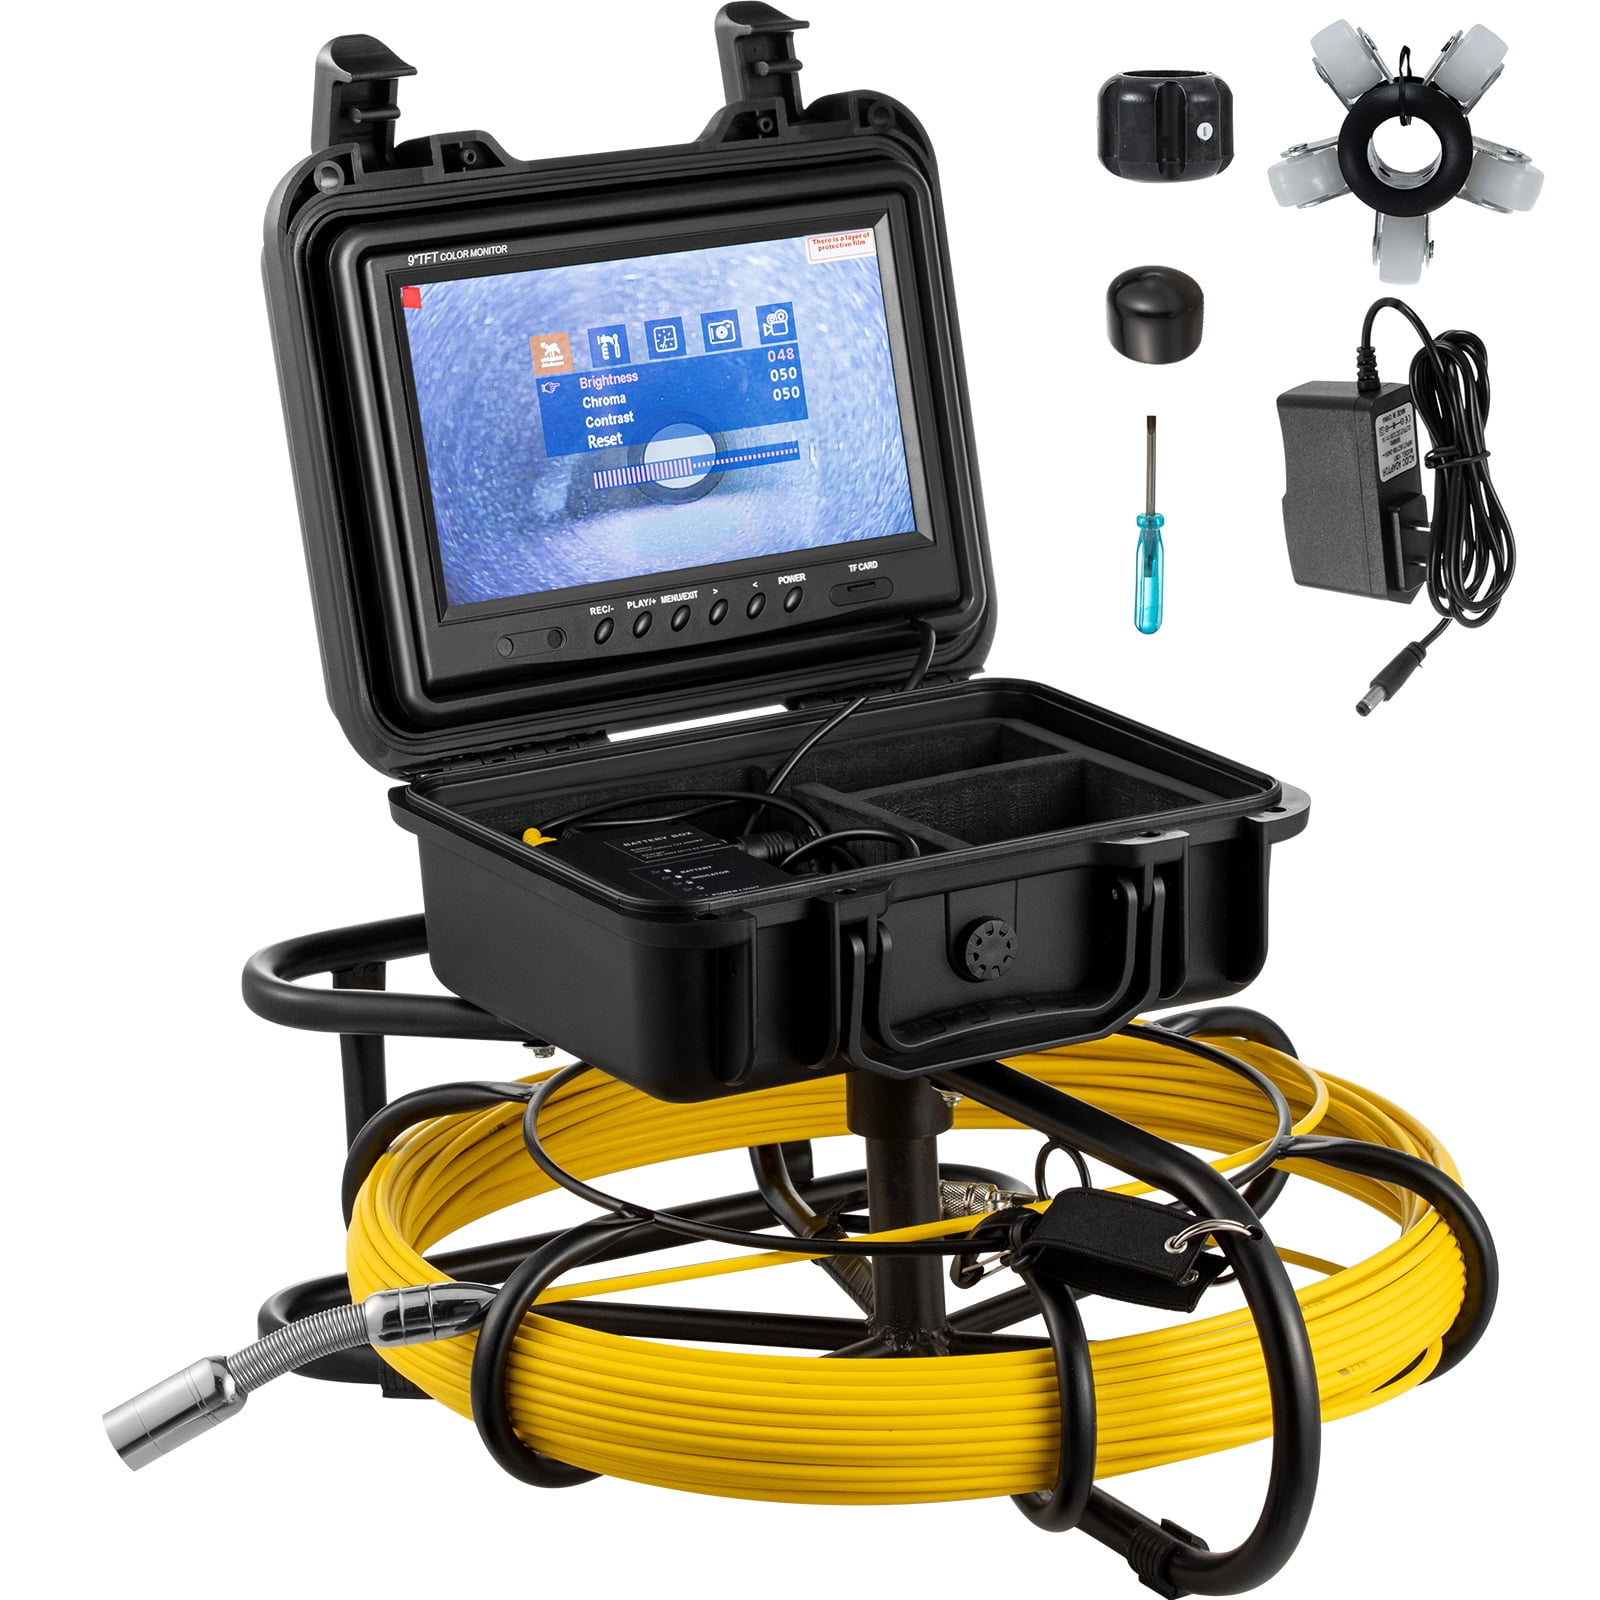 Drain Inspection Camera,SYANSPAN 4.3inch Monitor Endoscope Pipe Inspection Camera with 8500mAH Battery,16GB SD Card DVR Sewer Pipe Inspection Camera Waterproof IP68 100FT/30M